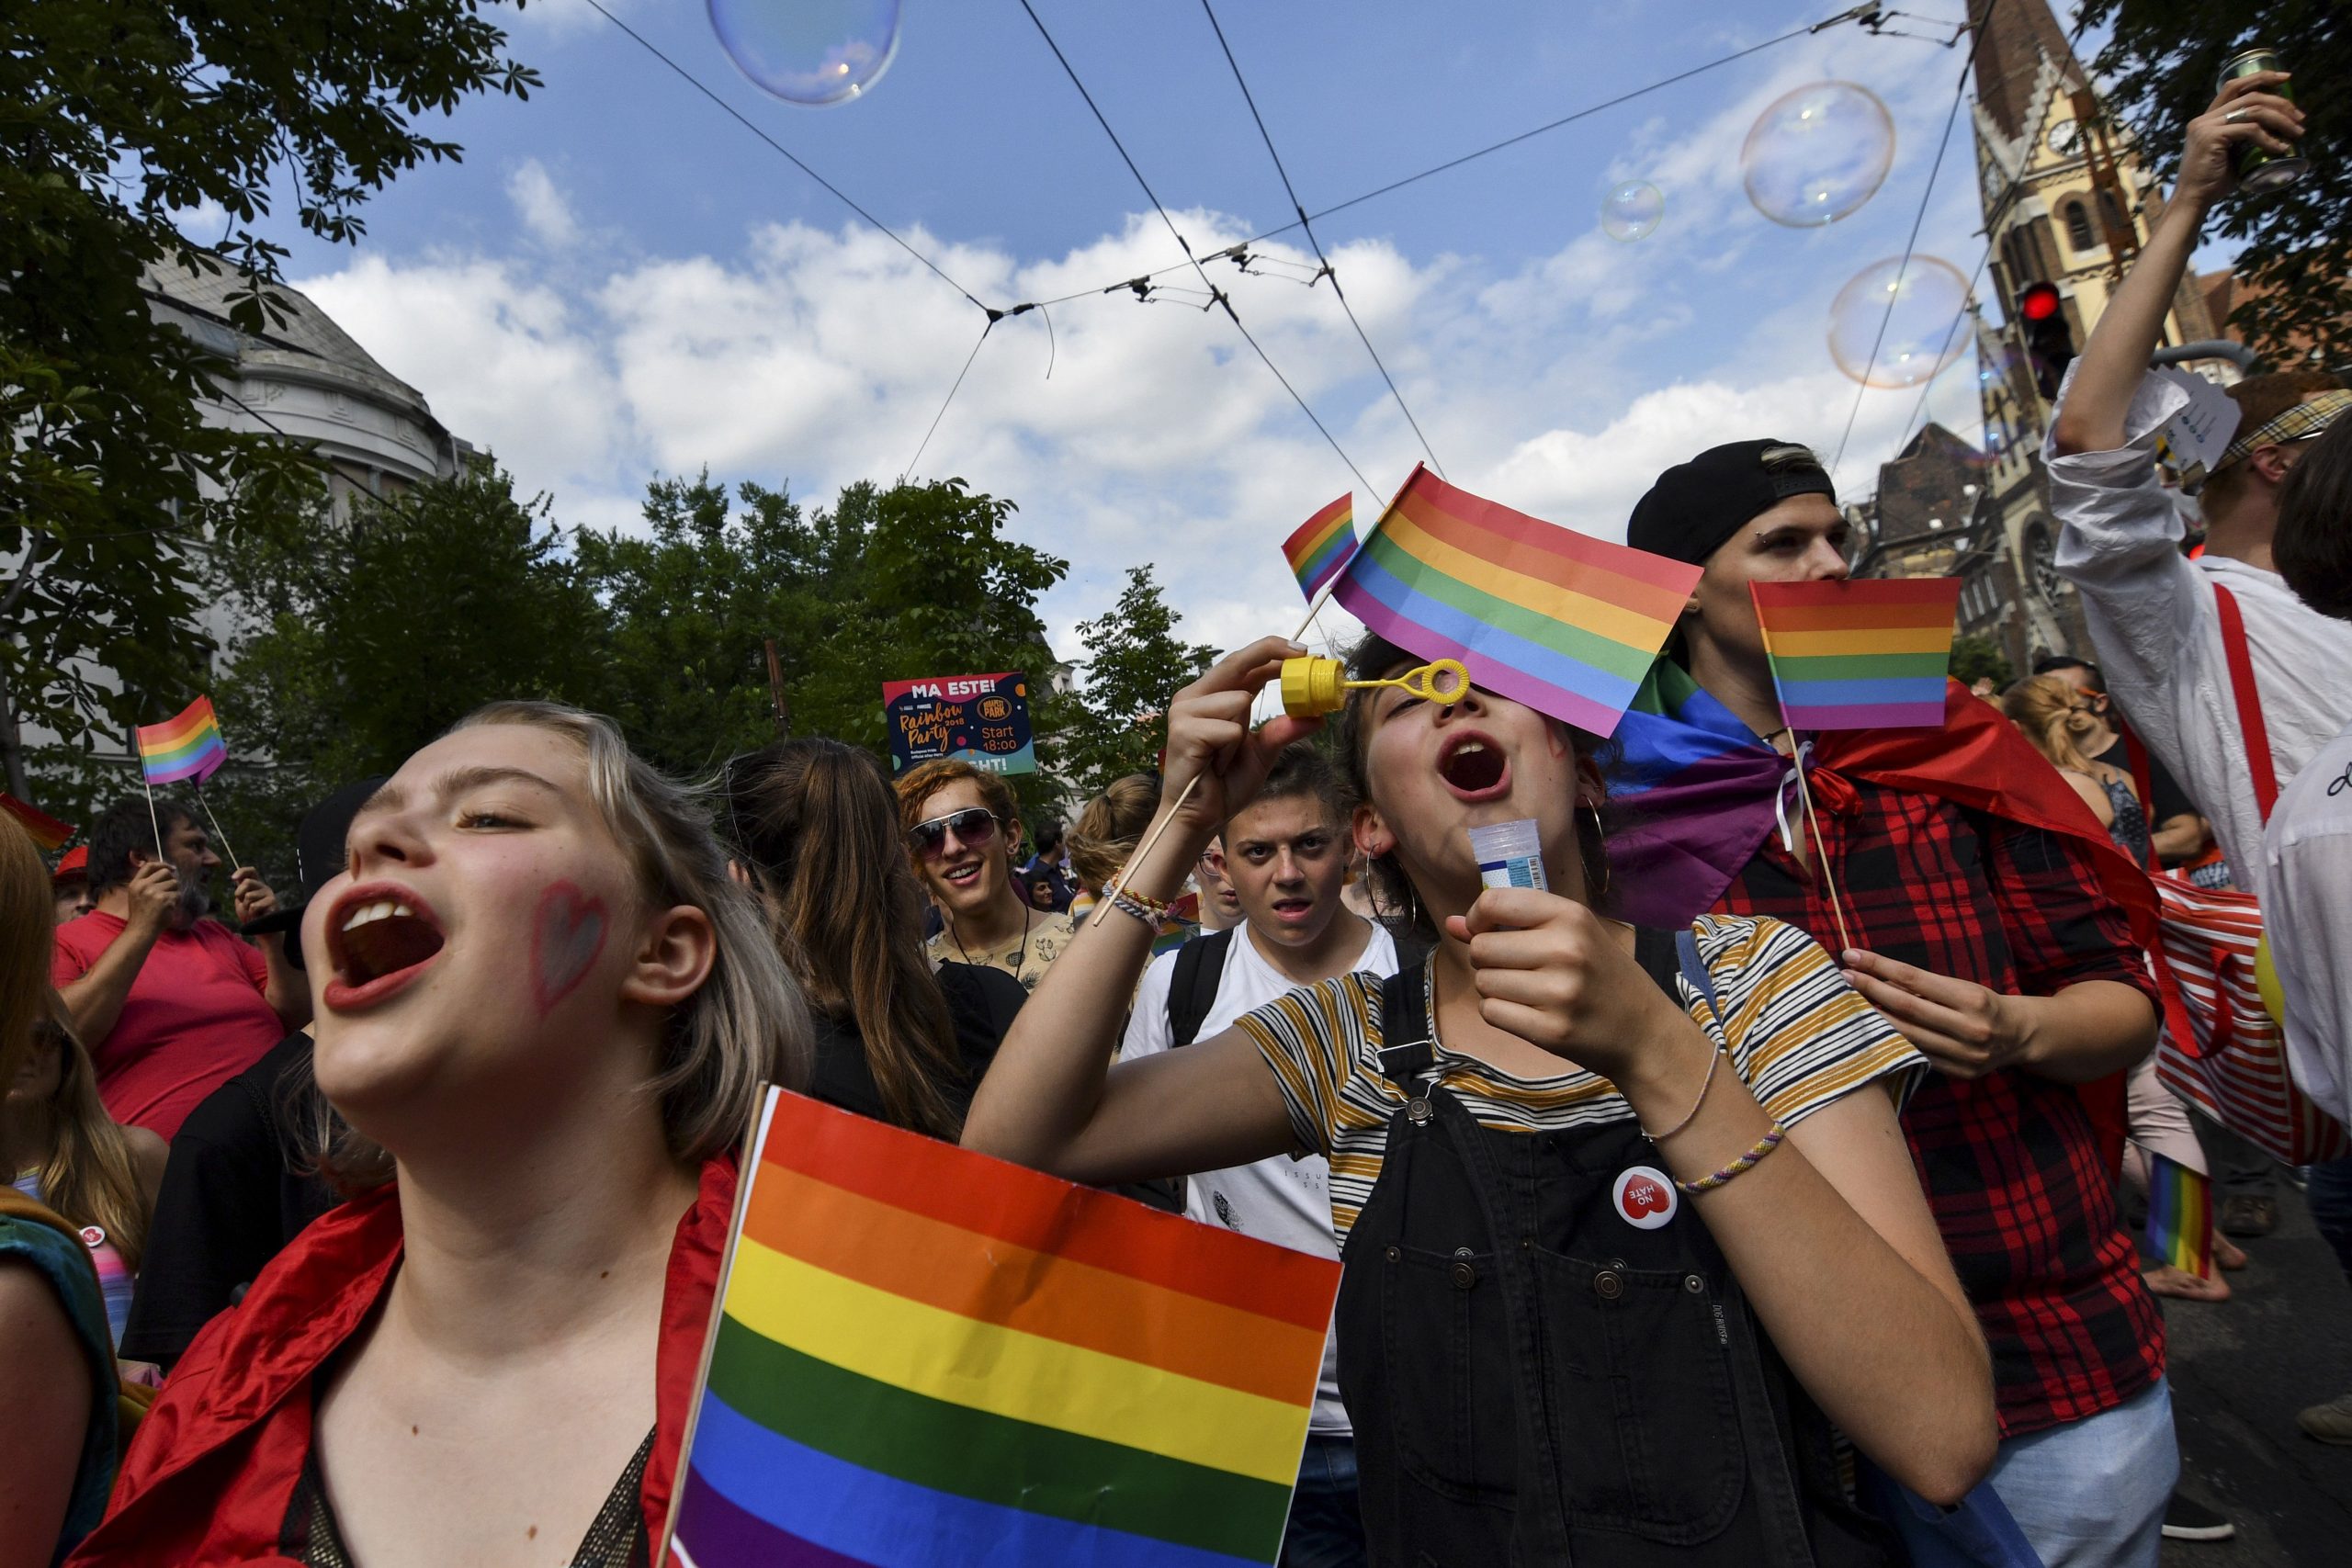 Fidesz to Prohibit 'Promotion of Homosexuality to Those Under 18'